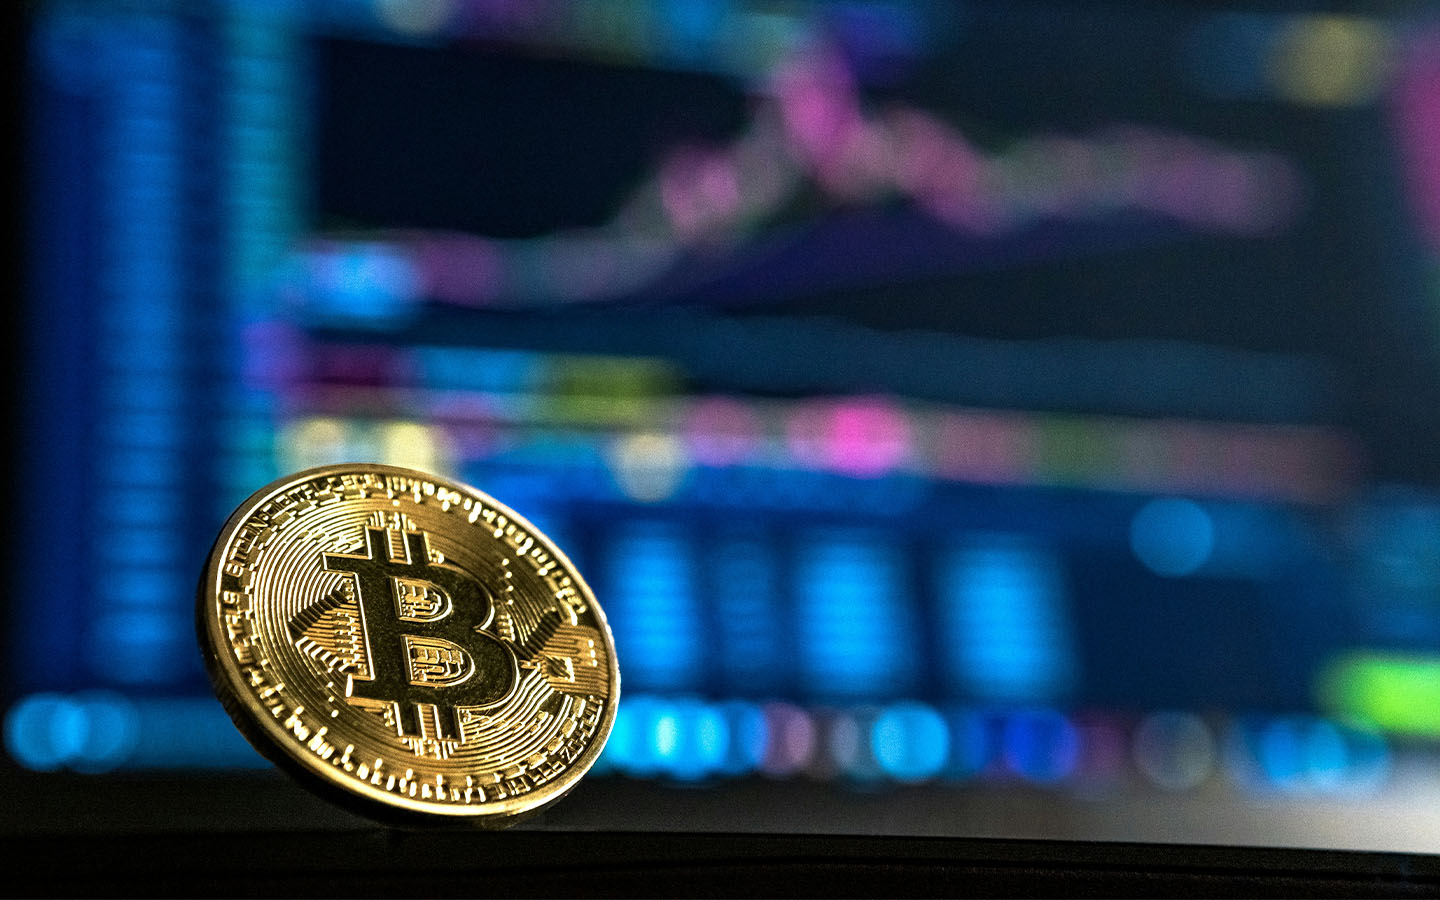 Hong Kong has approved cryptocurrency ETFs